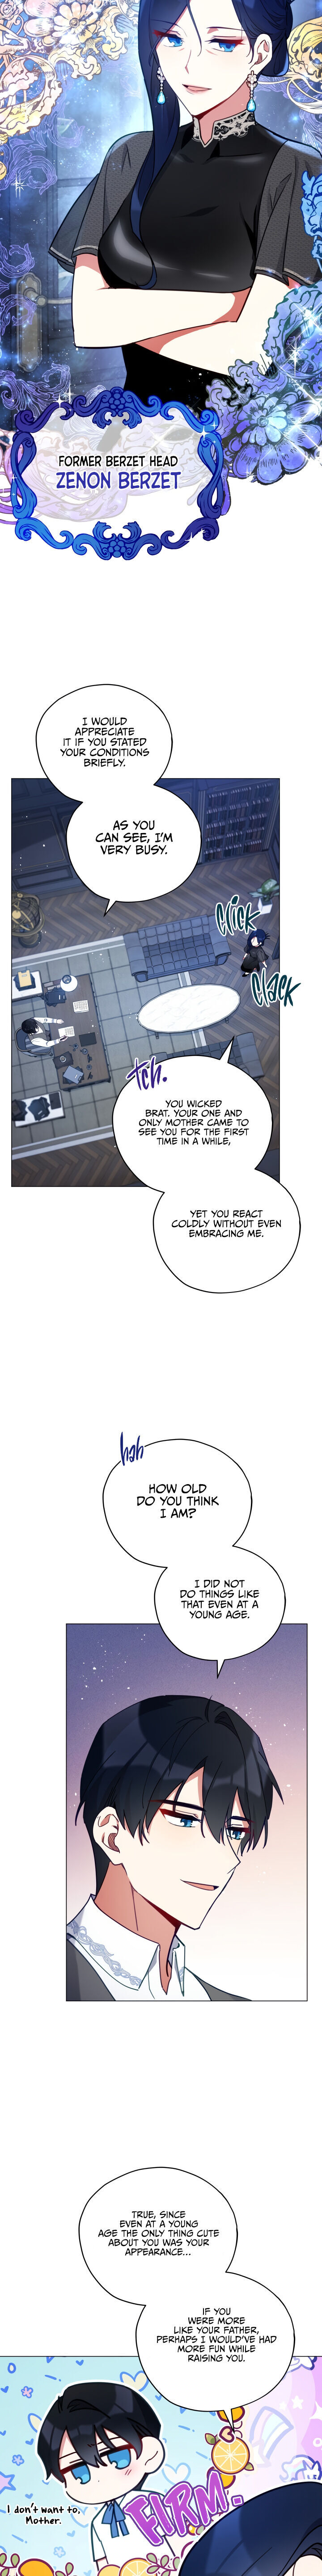 Untouchable Lady - Chapter 28 Page 7